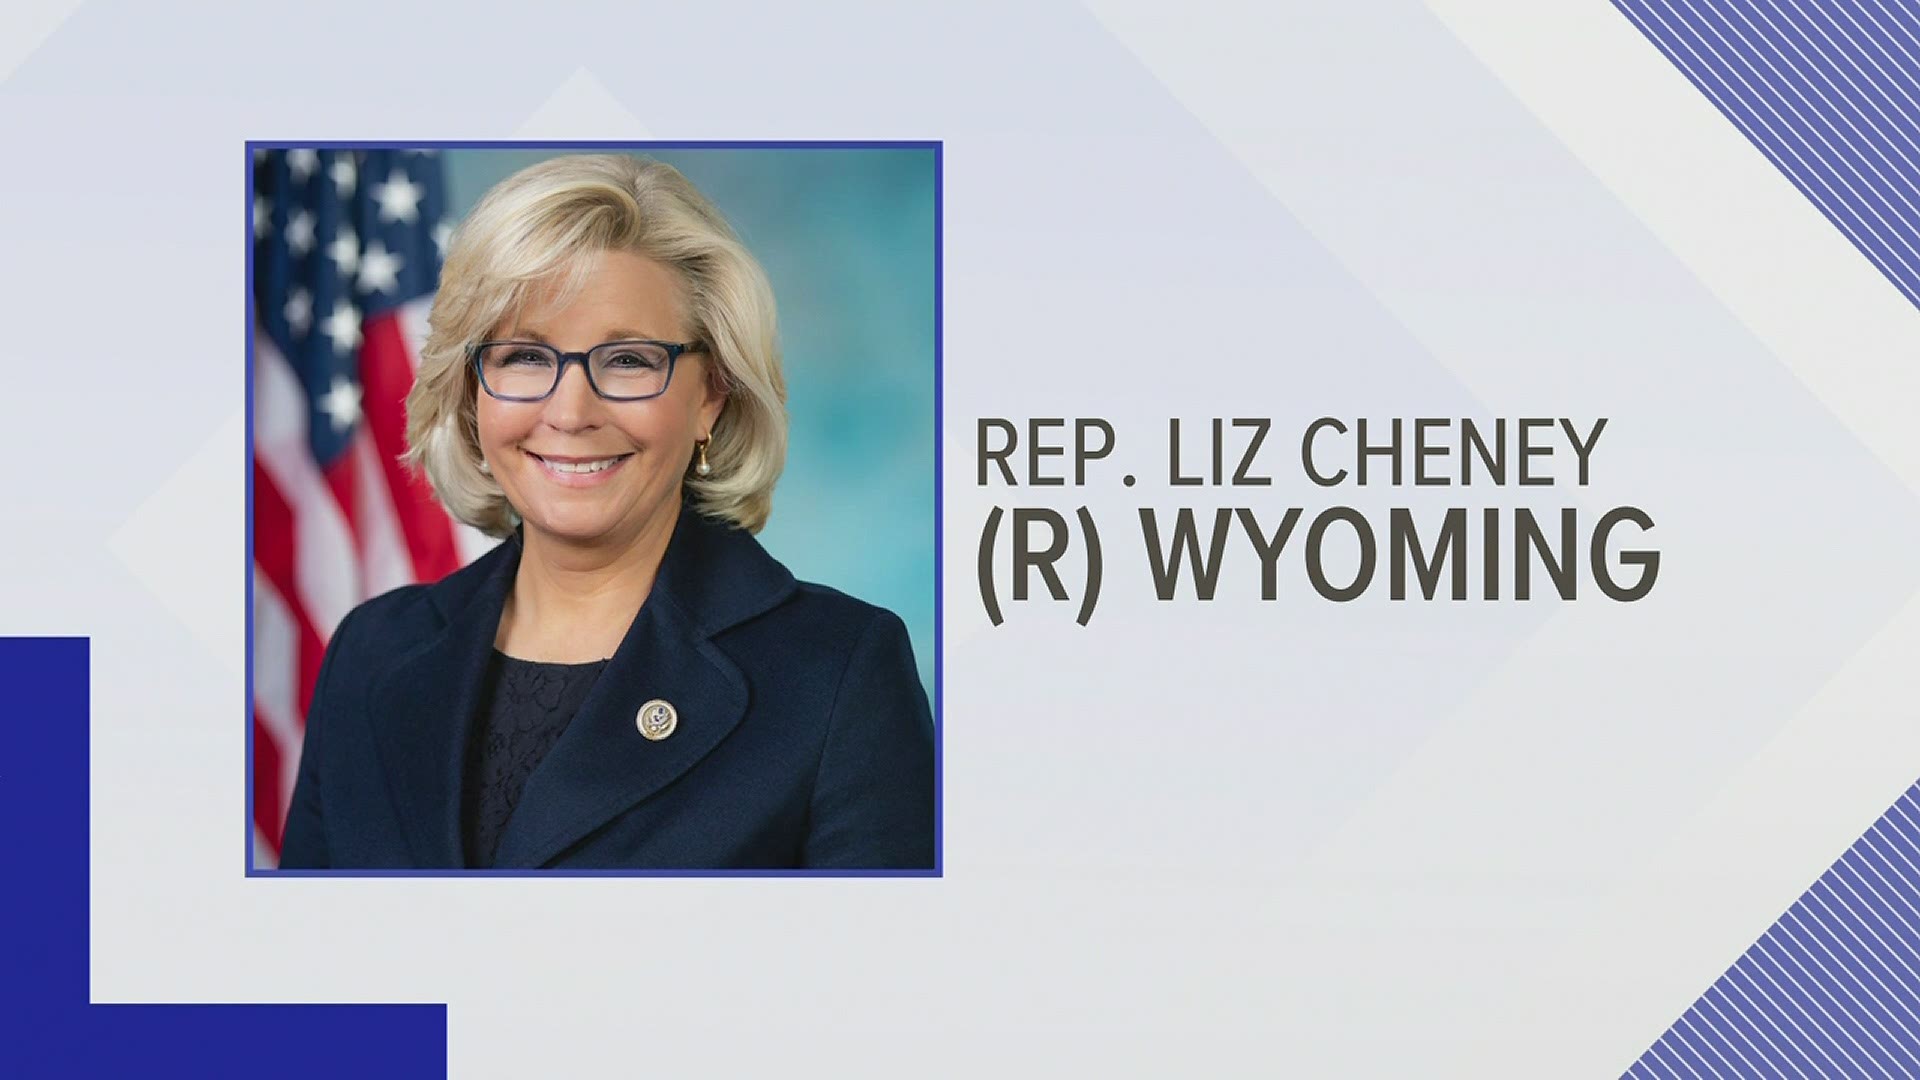 7 TN Republicans amongst those voting to oust Congresswoman Liz Cheney from her leadership position. The panel ways in on the upcoming vote.